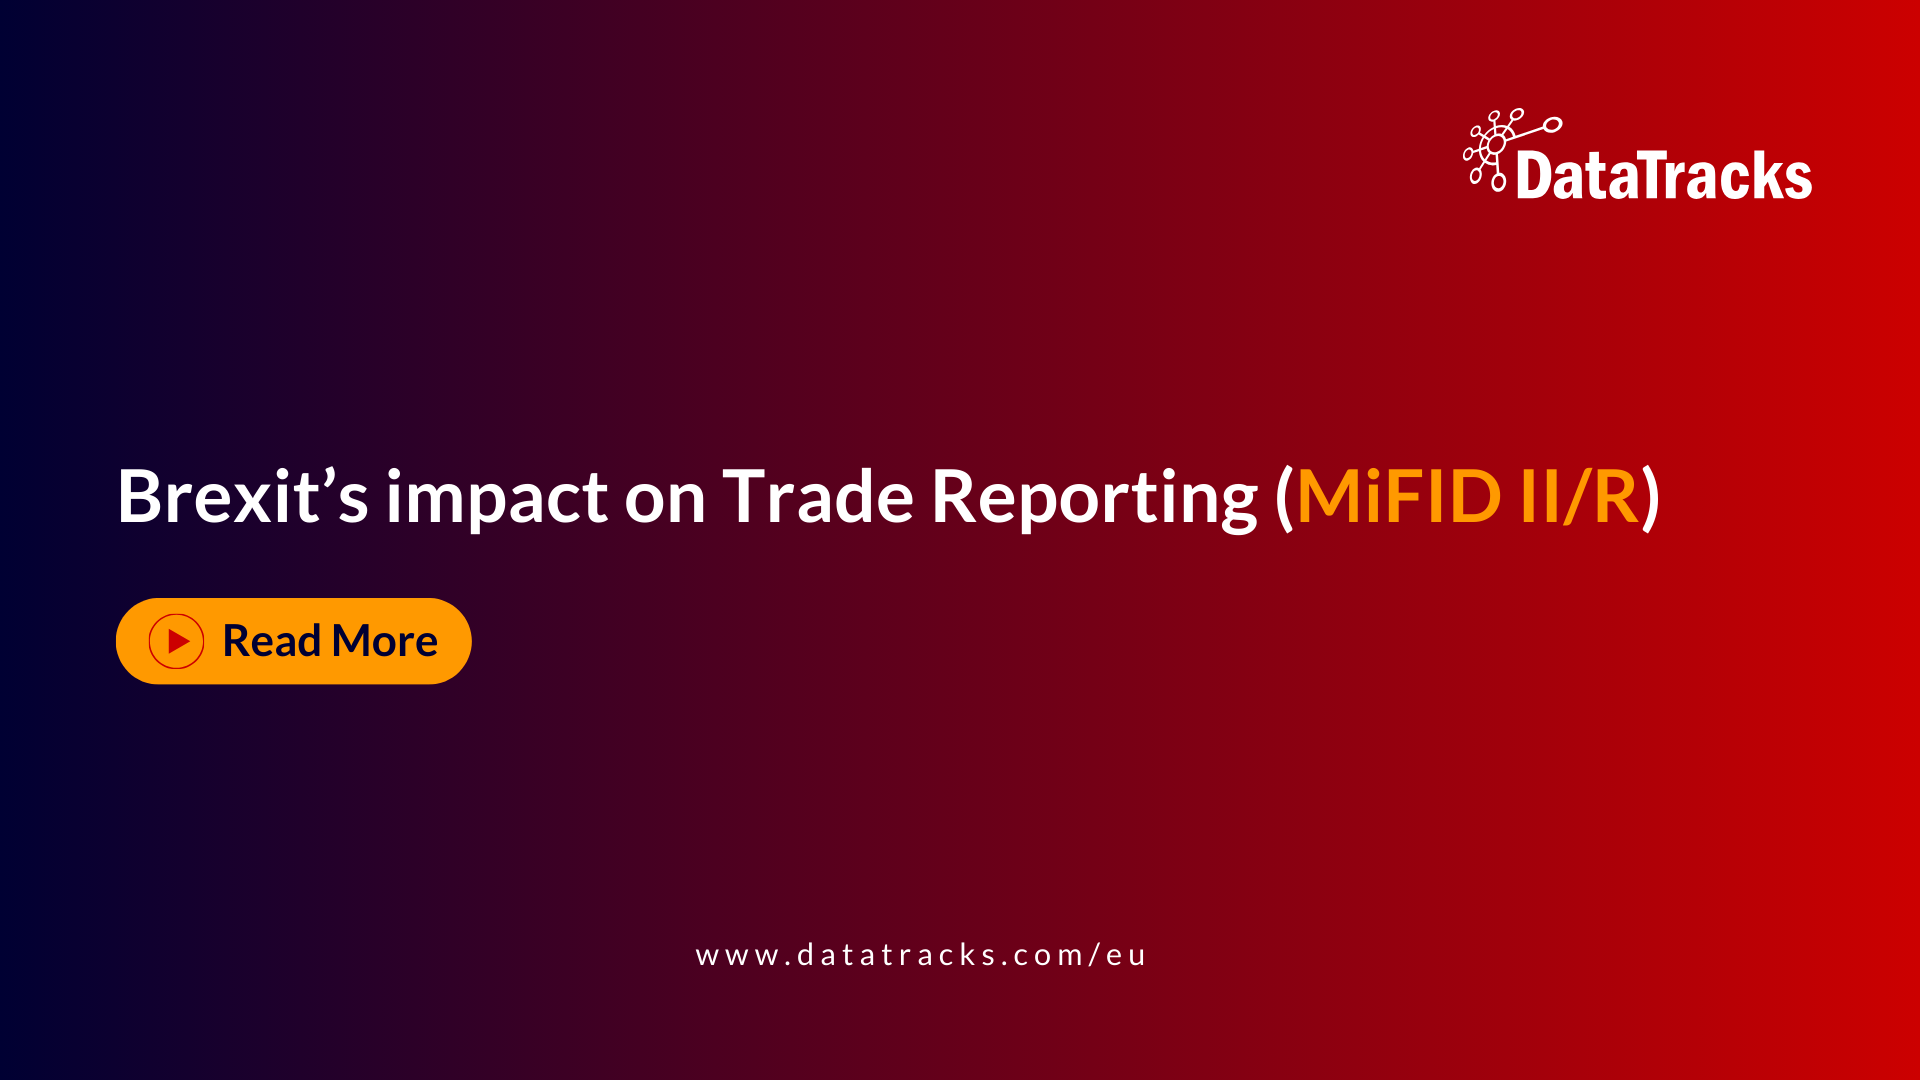 Brexit’s impact on Trade Reporting (MiFID II/R)